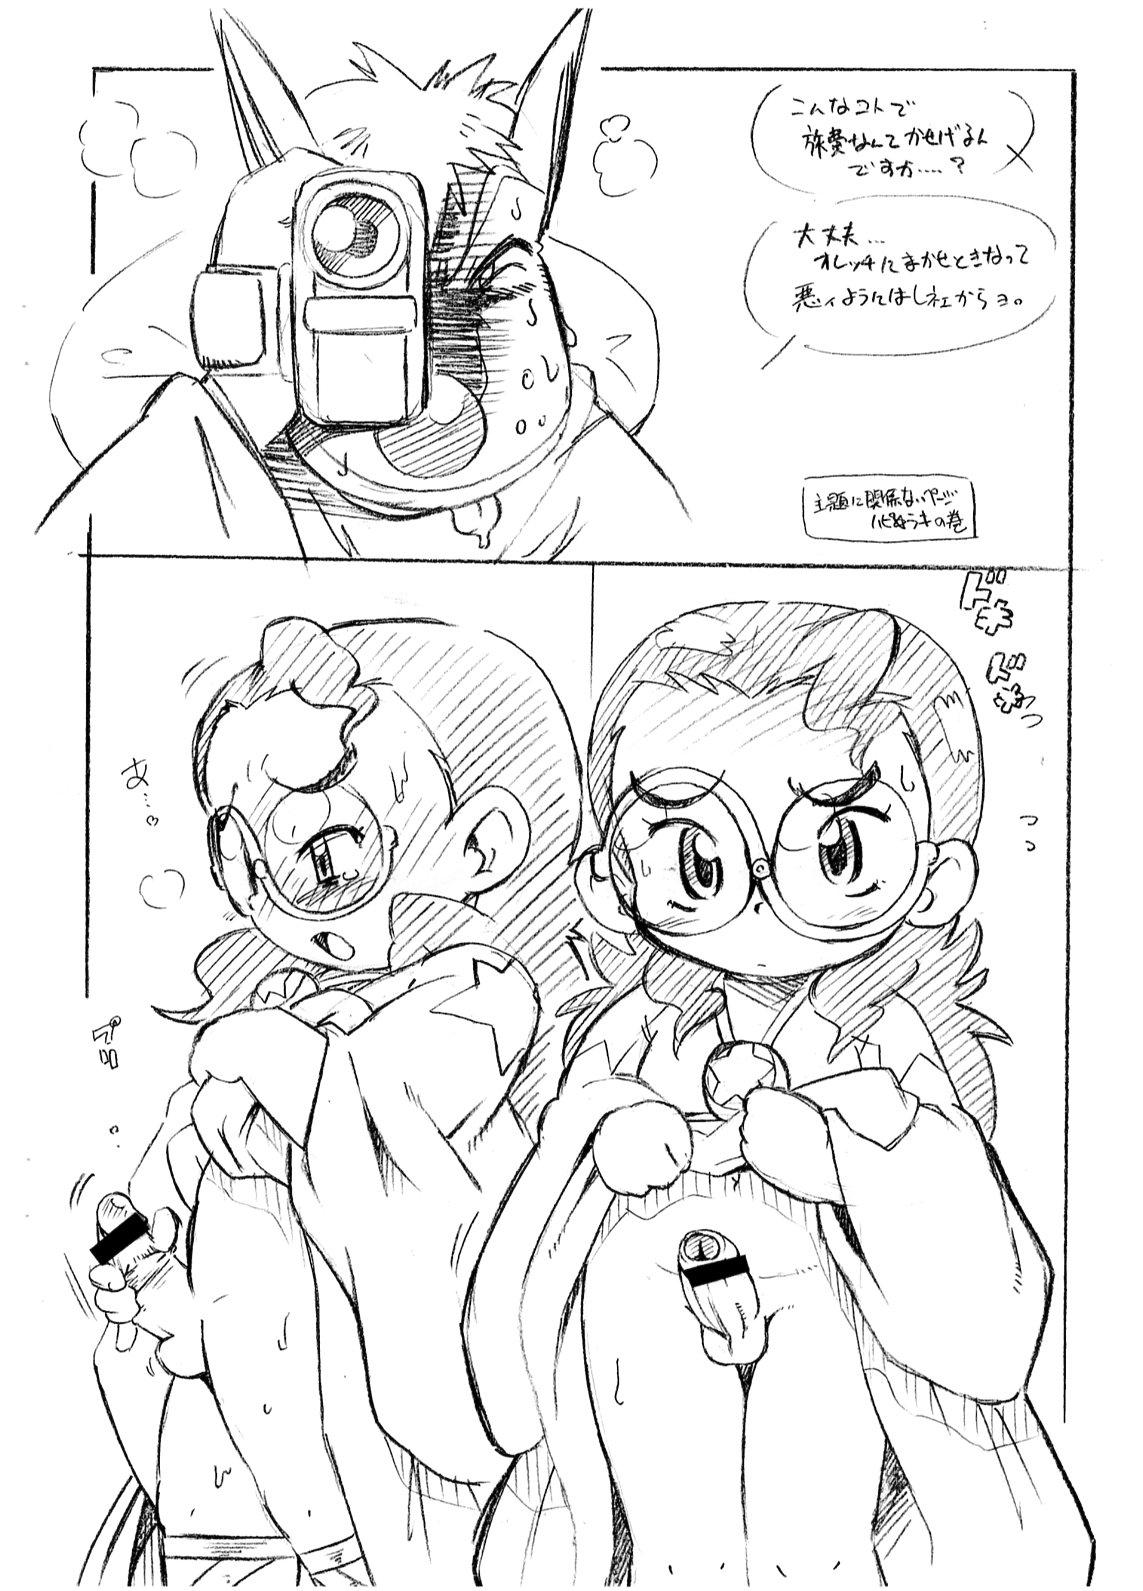 And Dansei Muke Cogure! 2 - Onegai my melody Que - Page 7